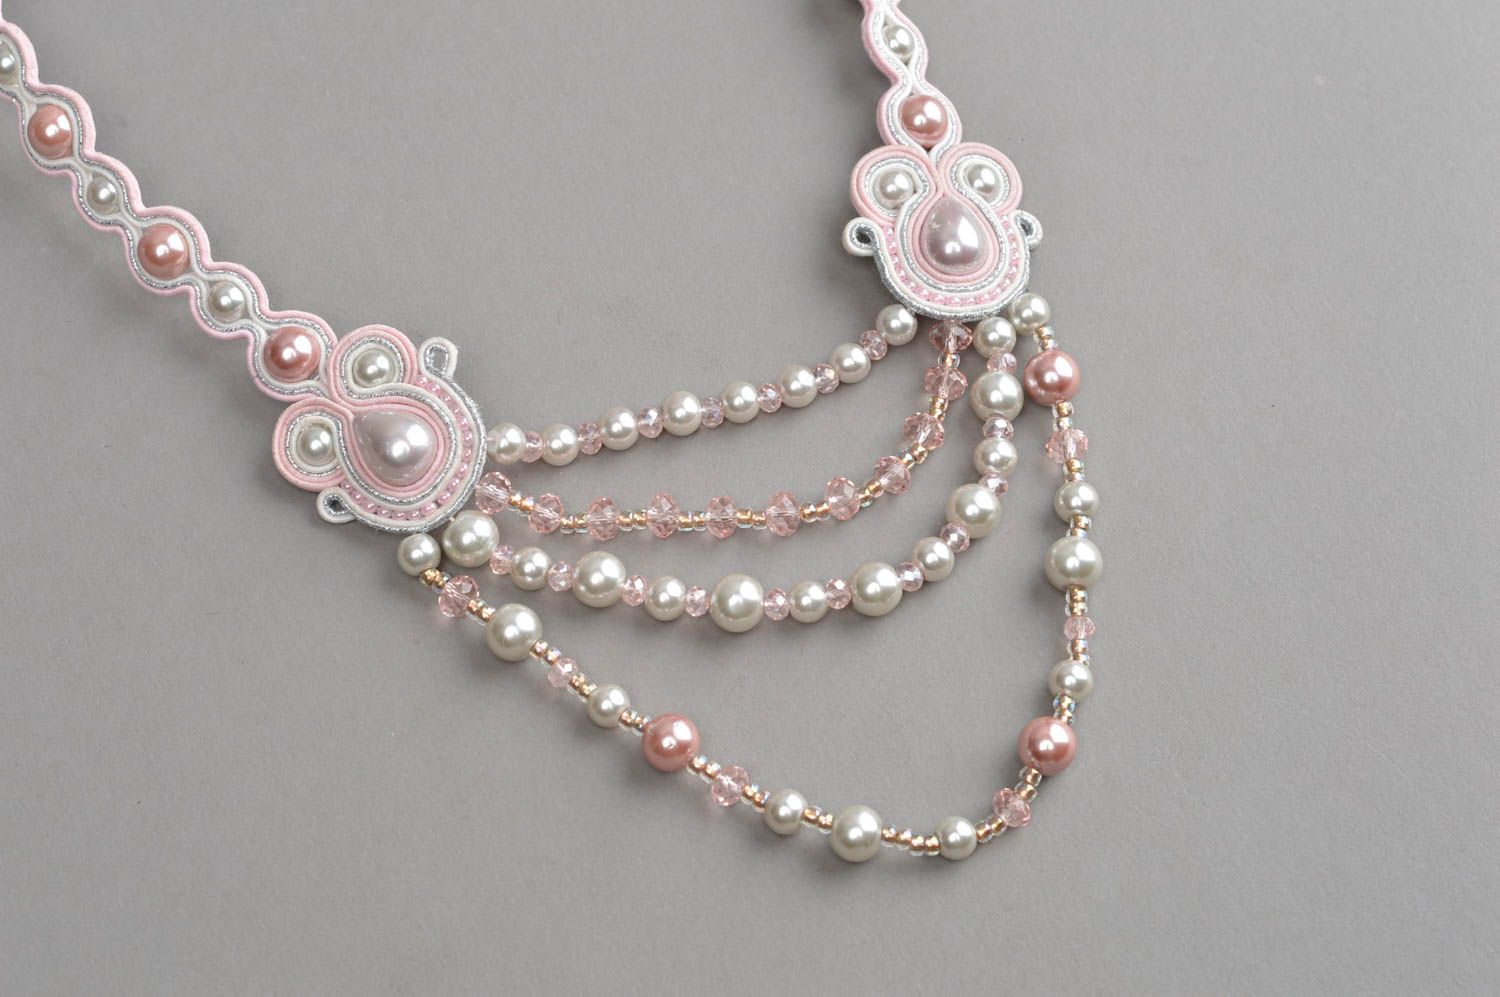 Handmade soutache necklace pearl necklace crystal stylish accessory for women photo 3